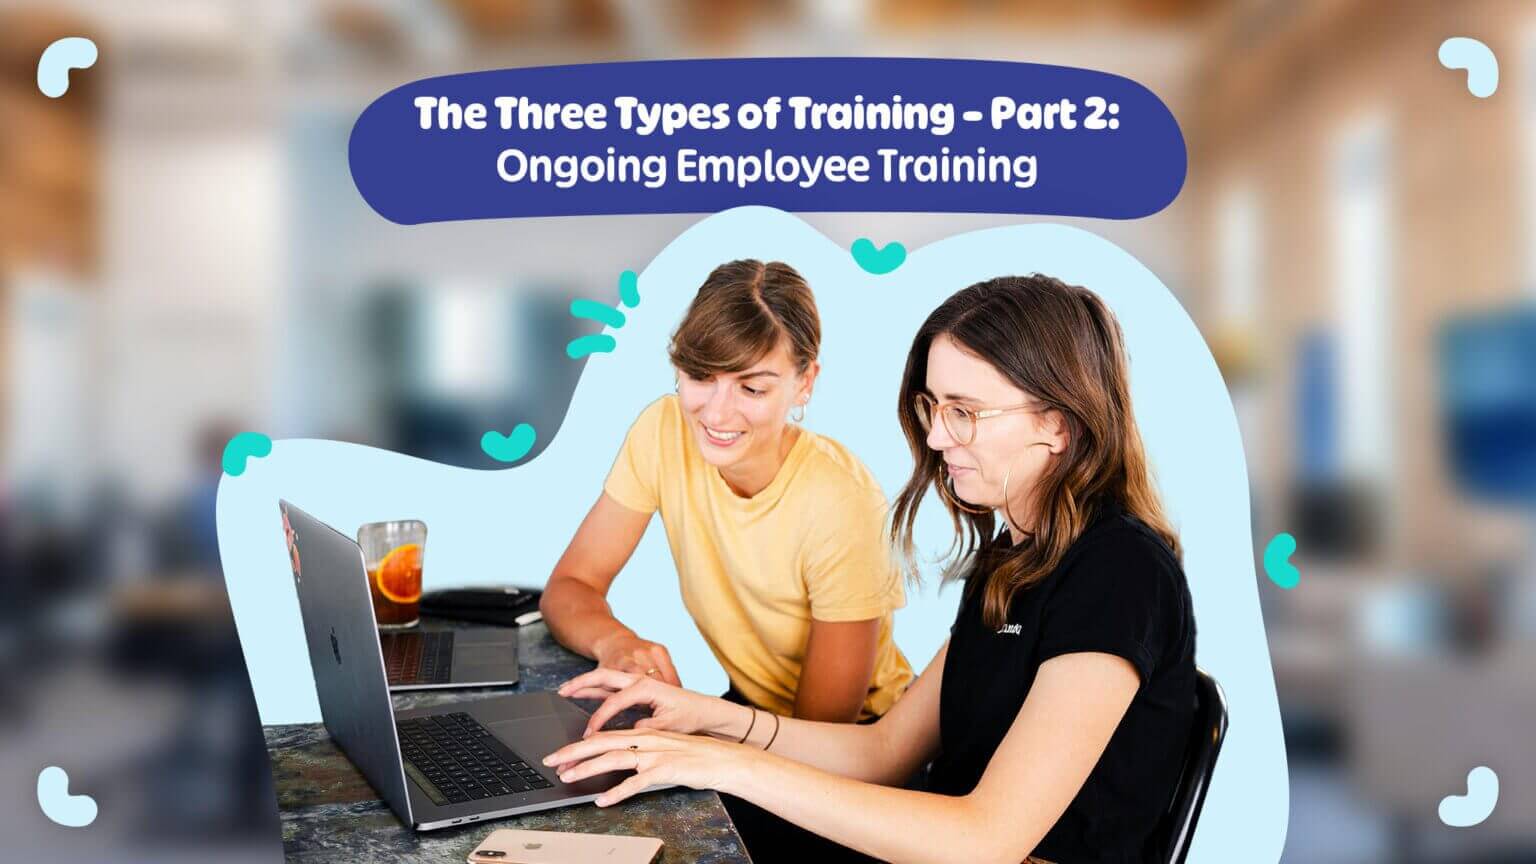 Types of employee training - ongoing training